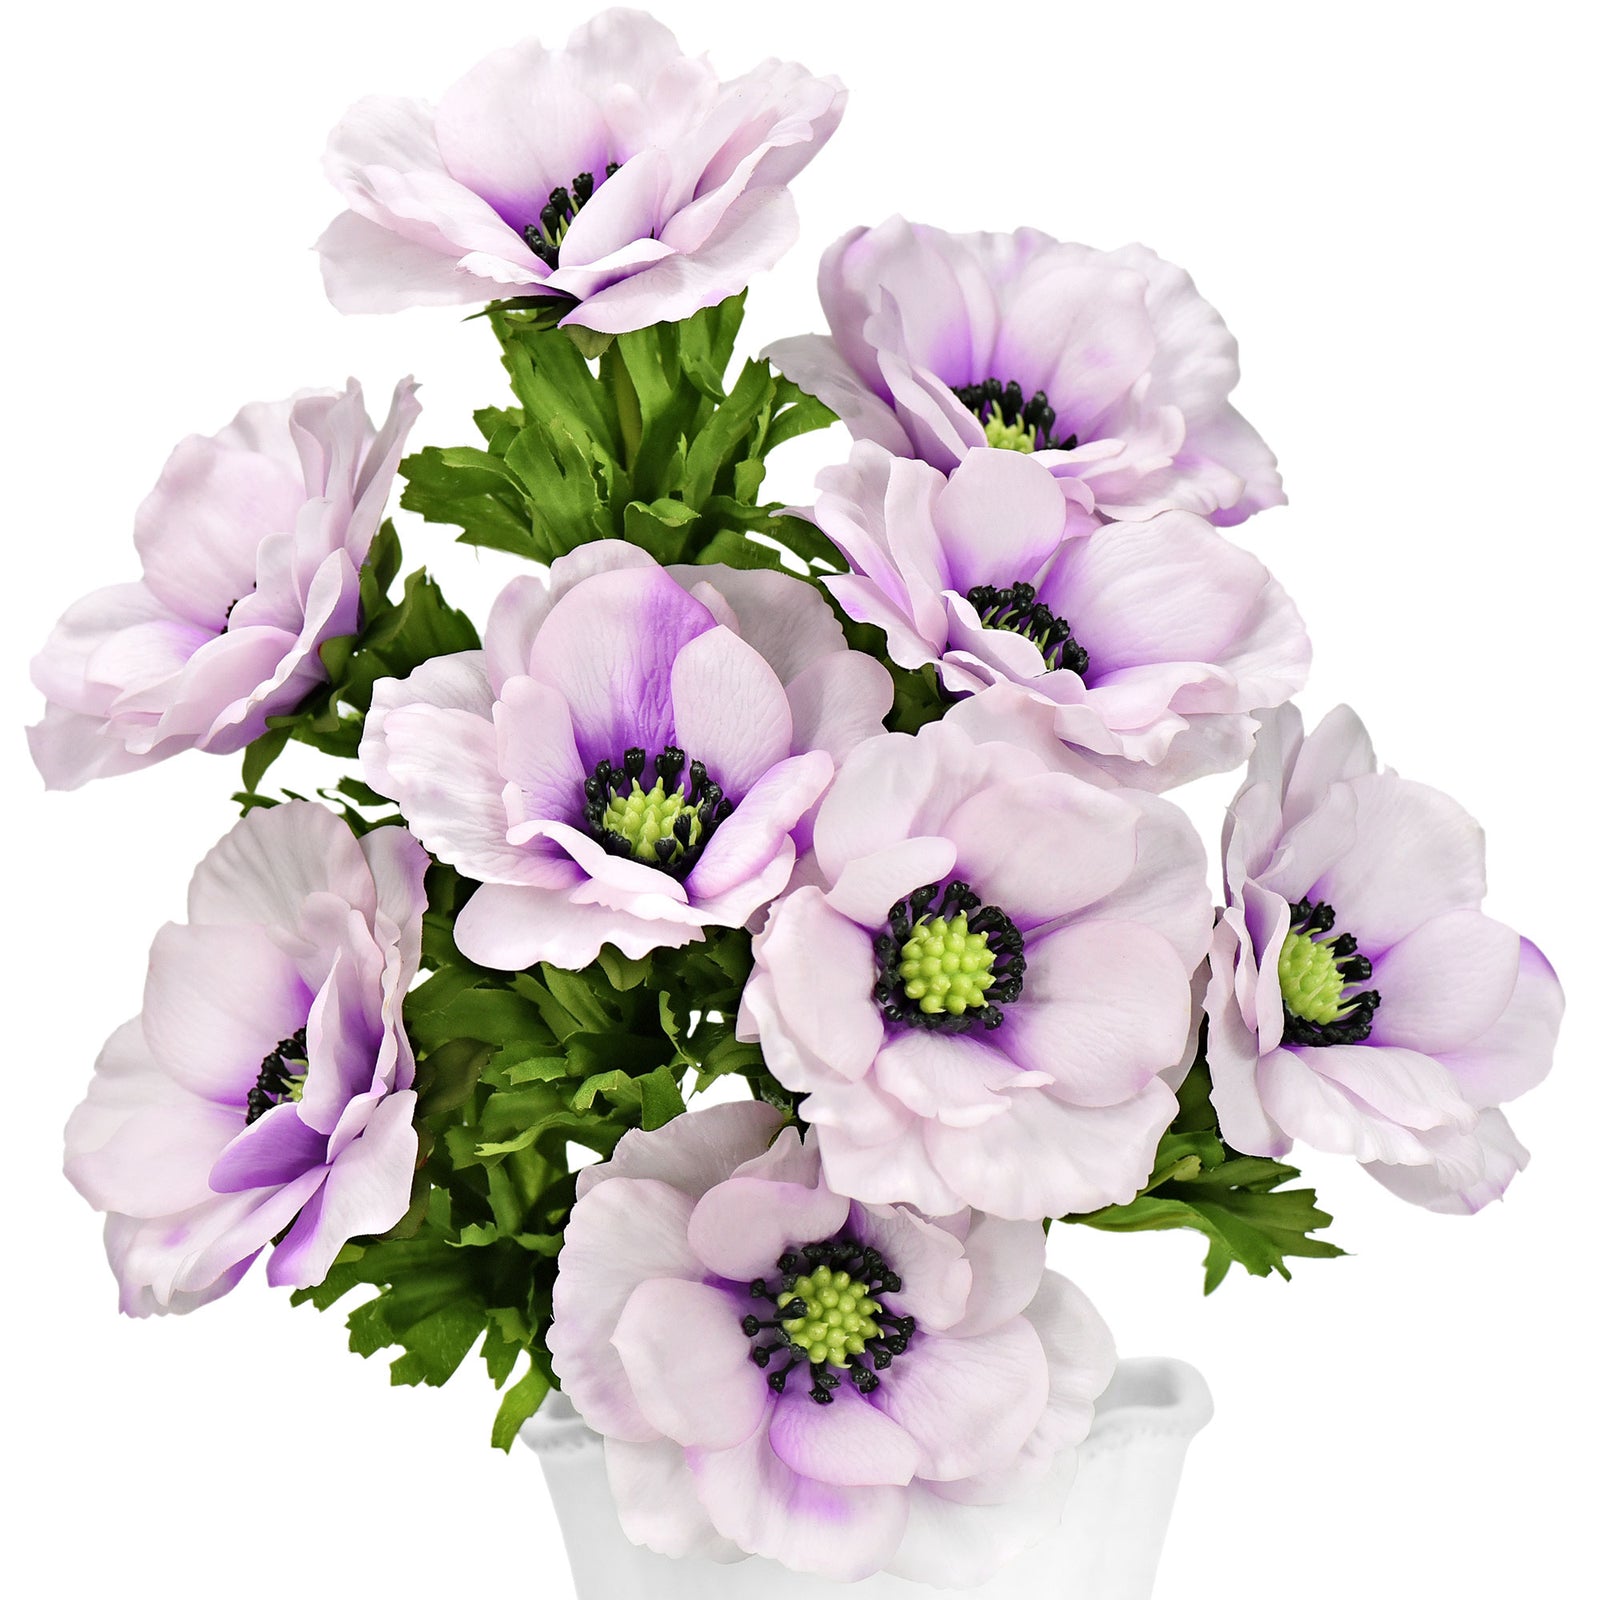 9 Long Stems of ‘Real Touch’ (Violet Purple) Artificial Anemone Silk Flowers with Leaves 48cm (18.9 inches)